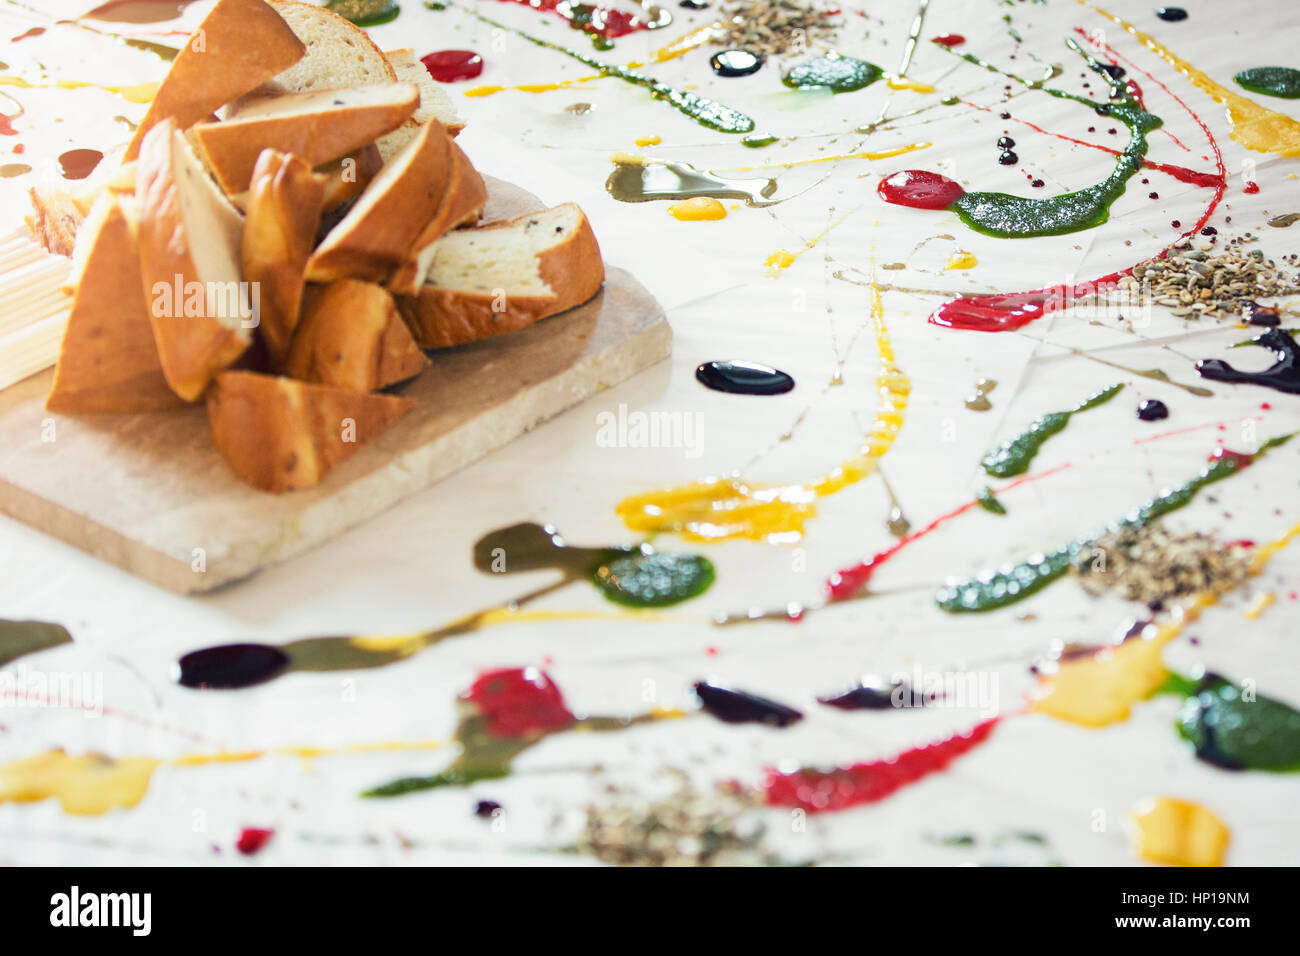 appetizer - bread with differnet colorful sauces Stock Photo